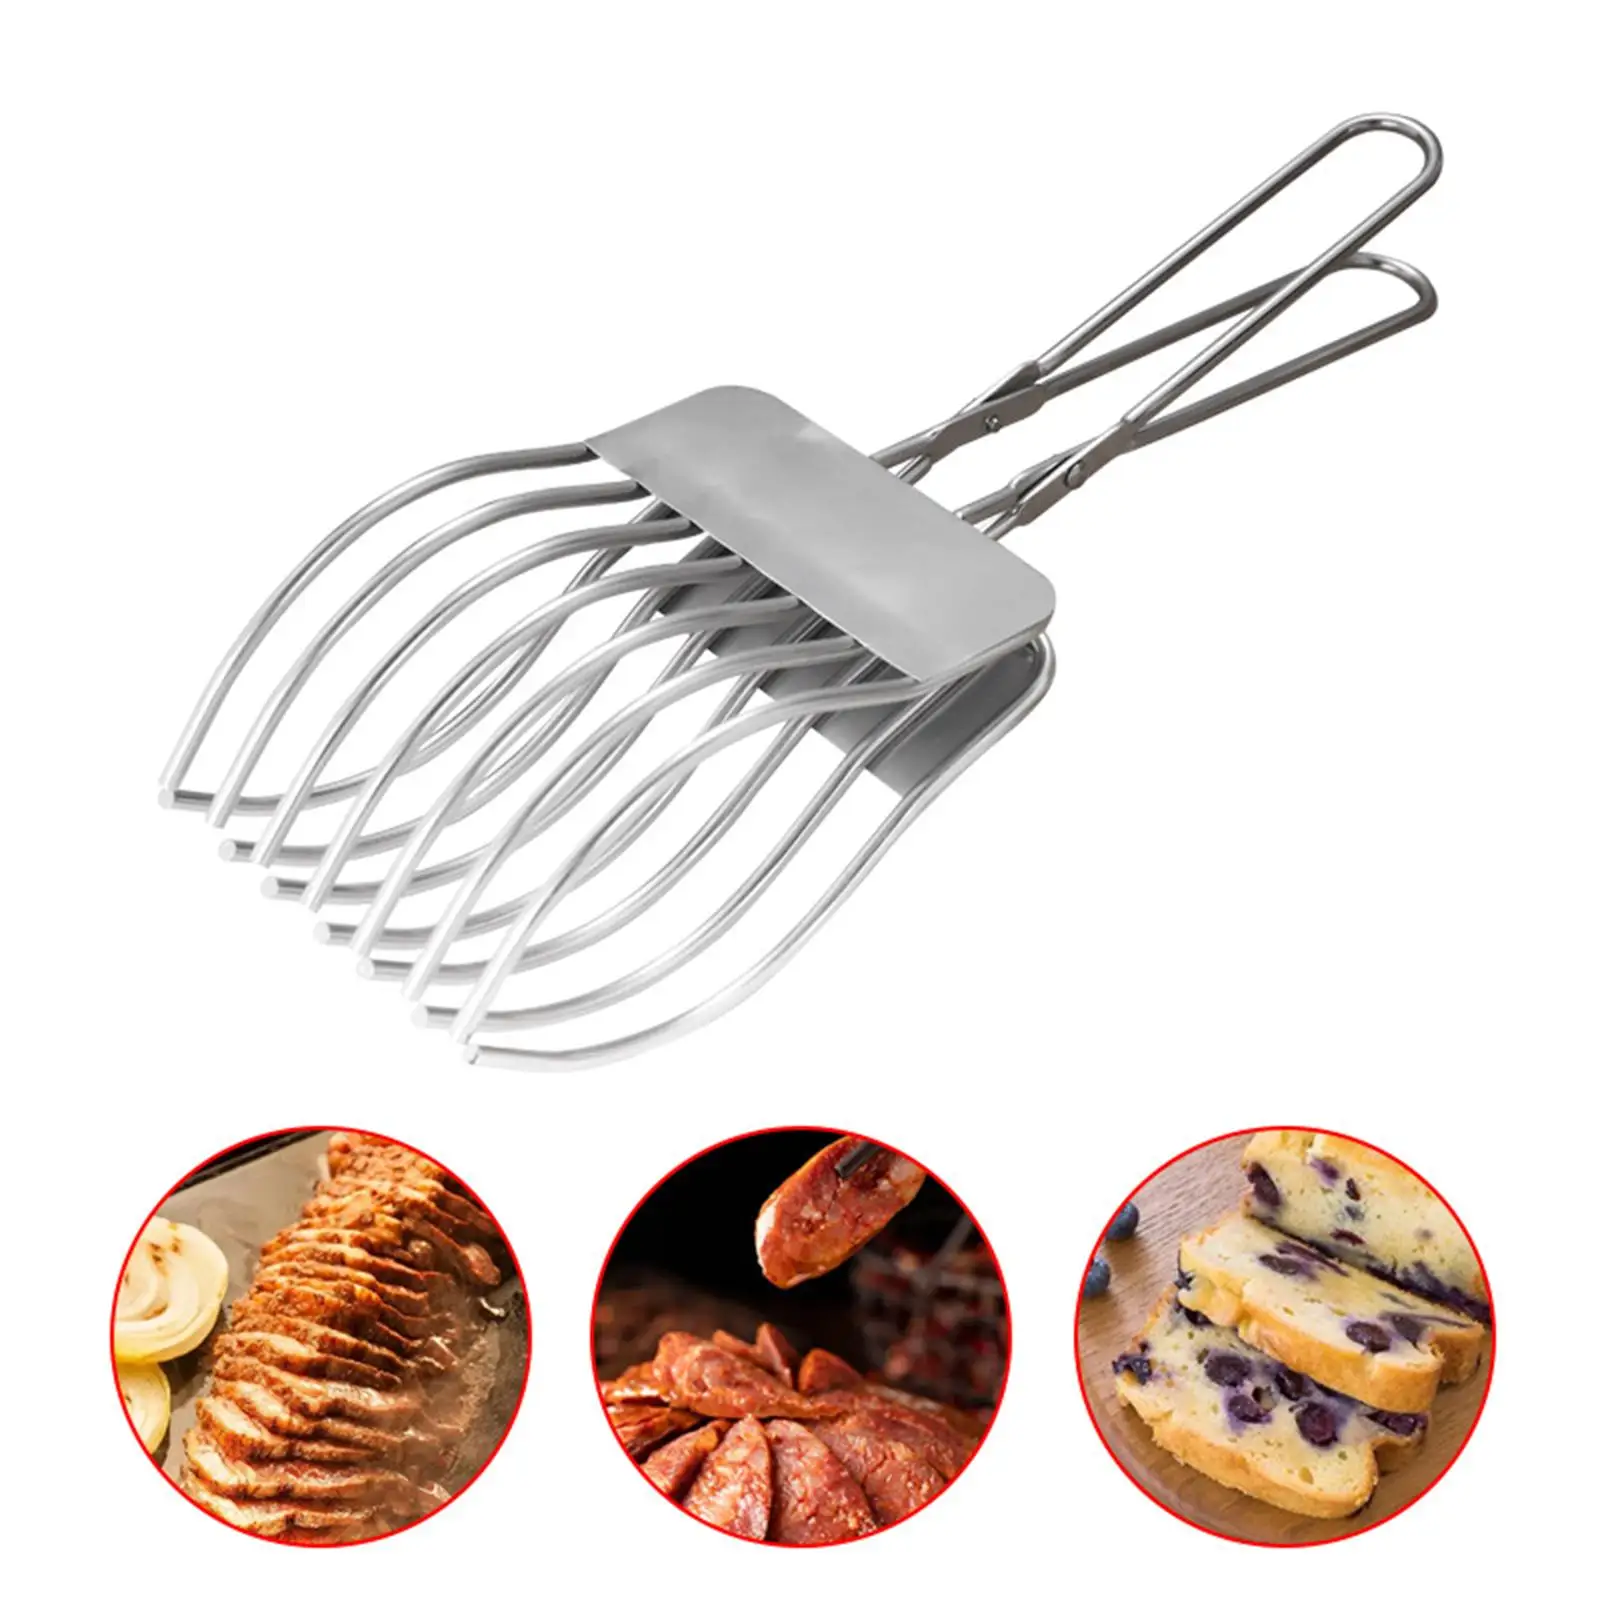 Slicing Kitchen Tongs Food Serving Kitchen Gadgets Roast Beef Tongs for Slicing Vegetable